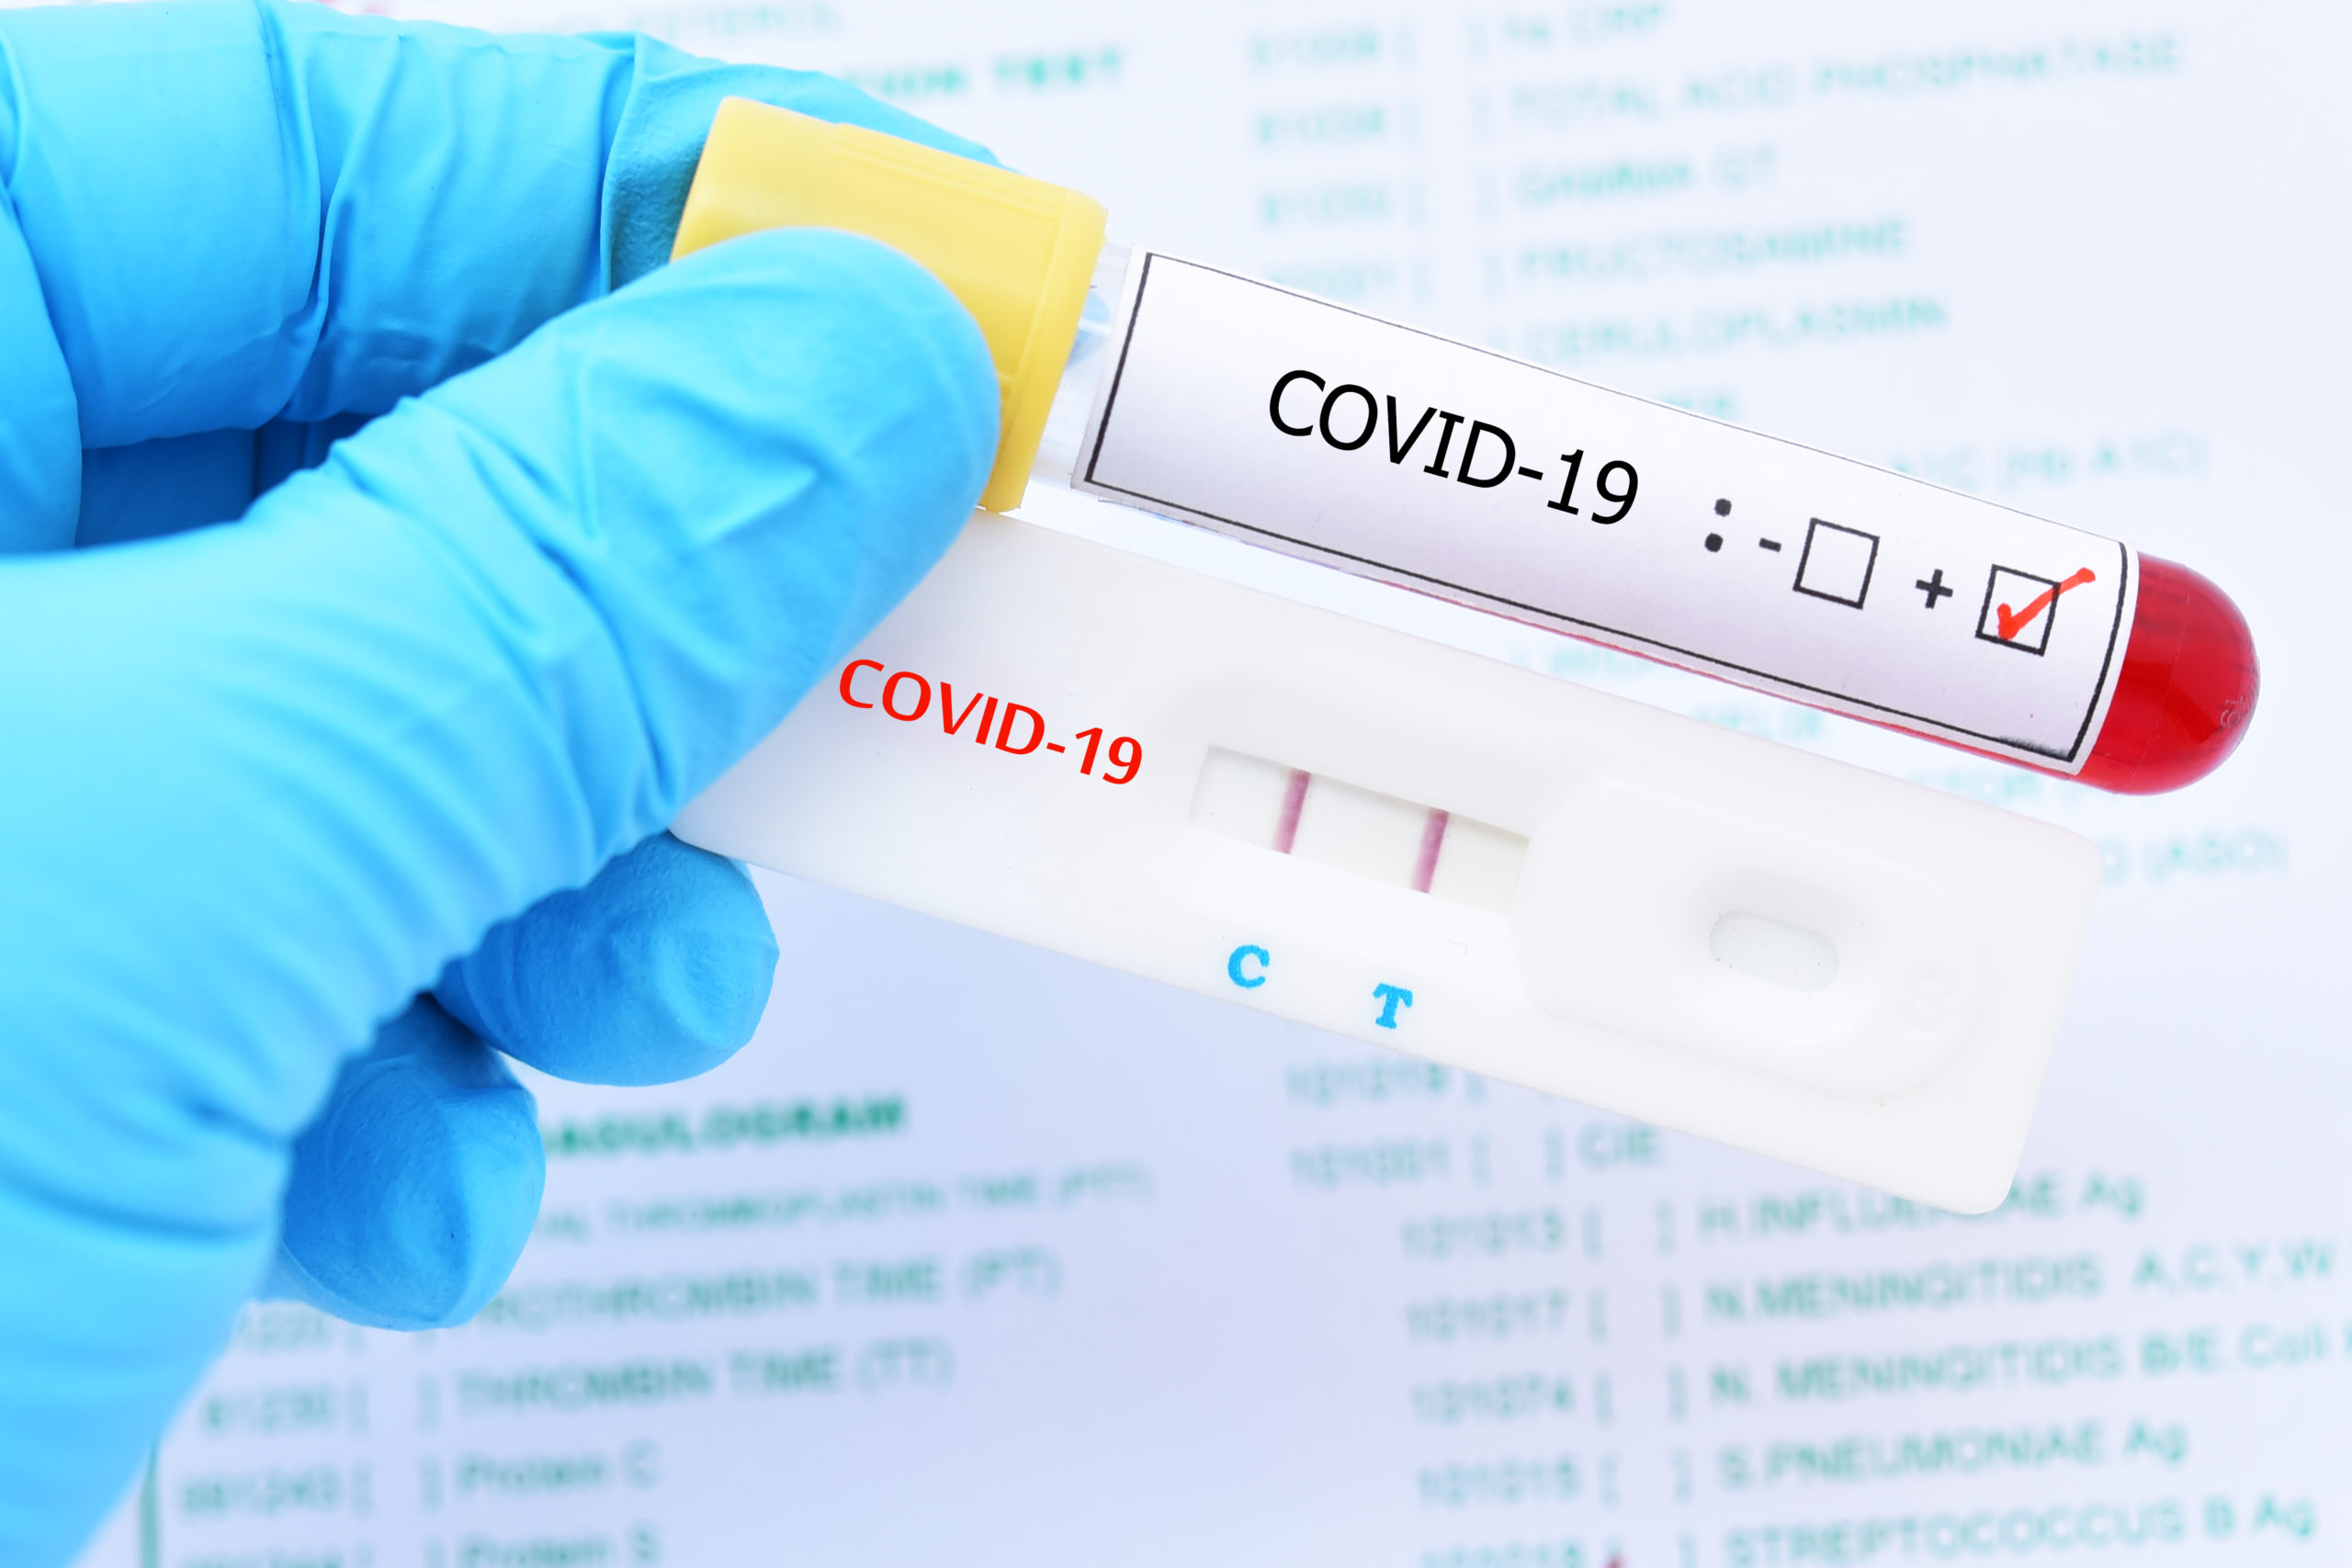 Positive test result by using rapid test device for COVID-19 virus